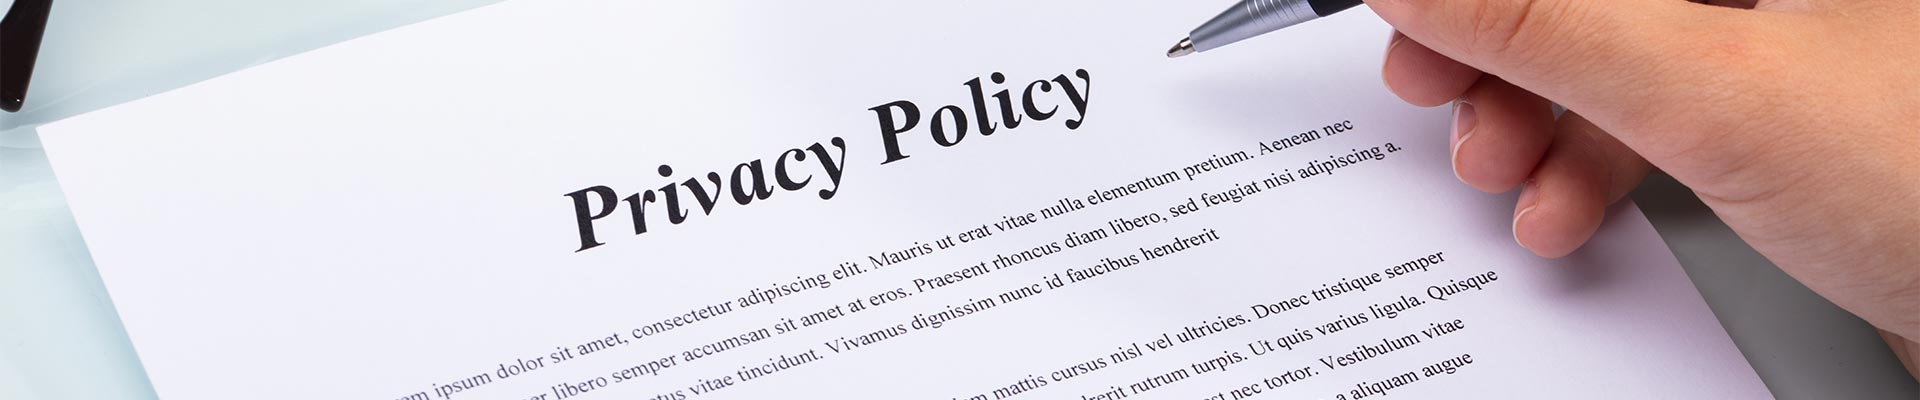 Privacy Policy Banner Image